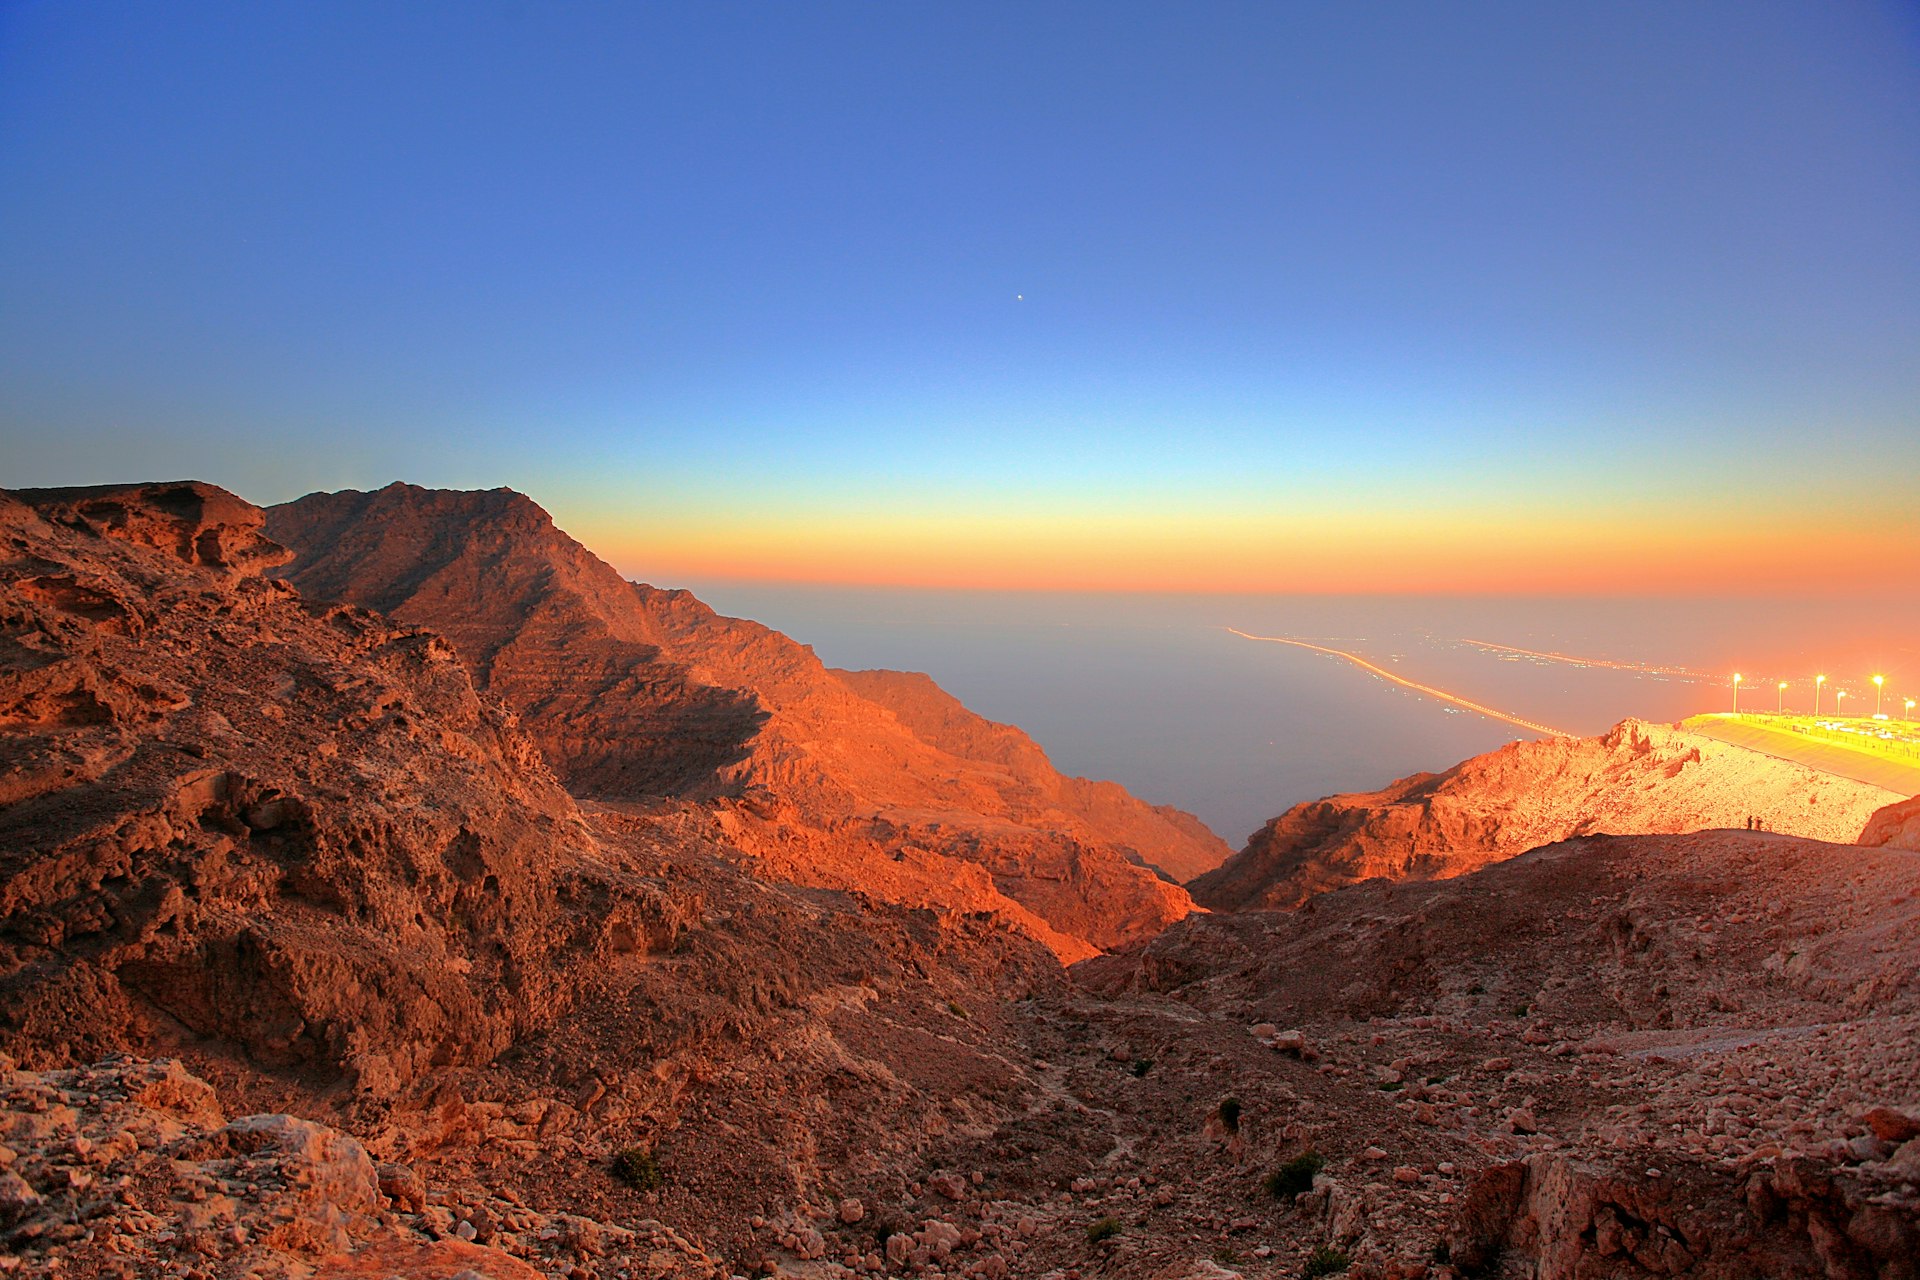 The Jabal Hafeet Mountain Road with epic views